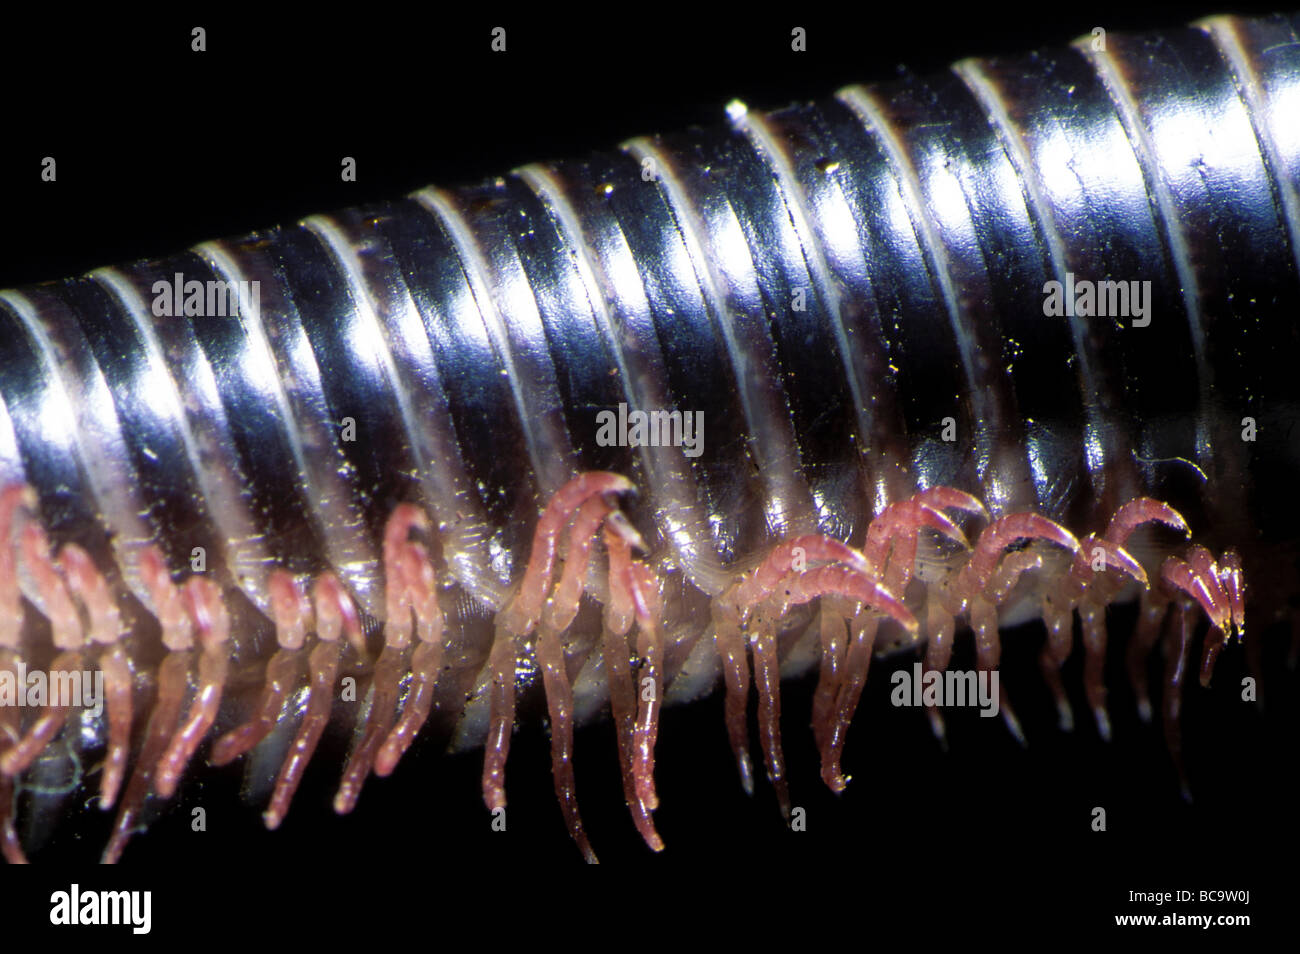 Close up of the walking legs of a Queensland Millipede, Julus Stock Photo